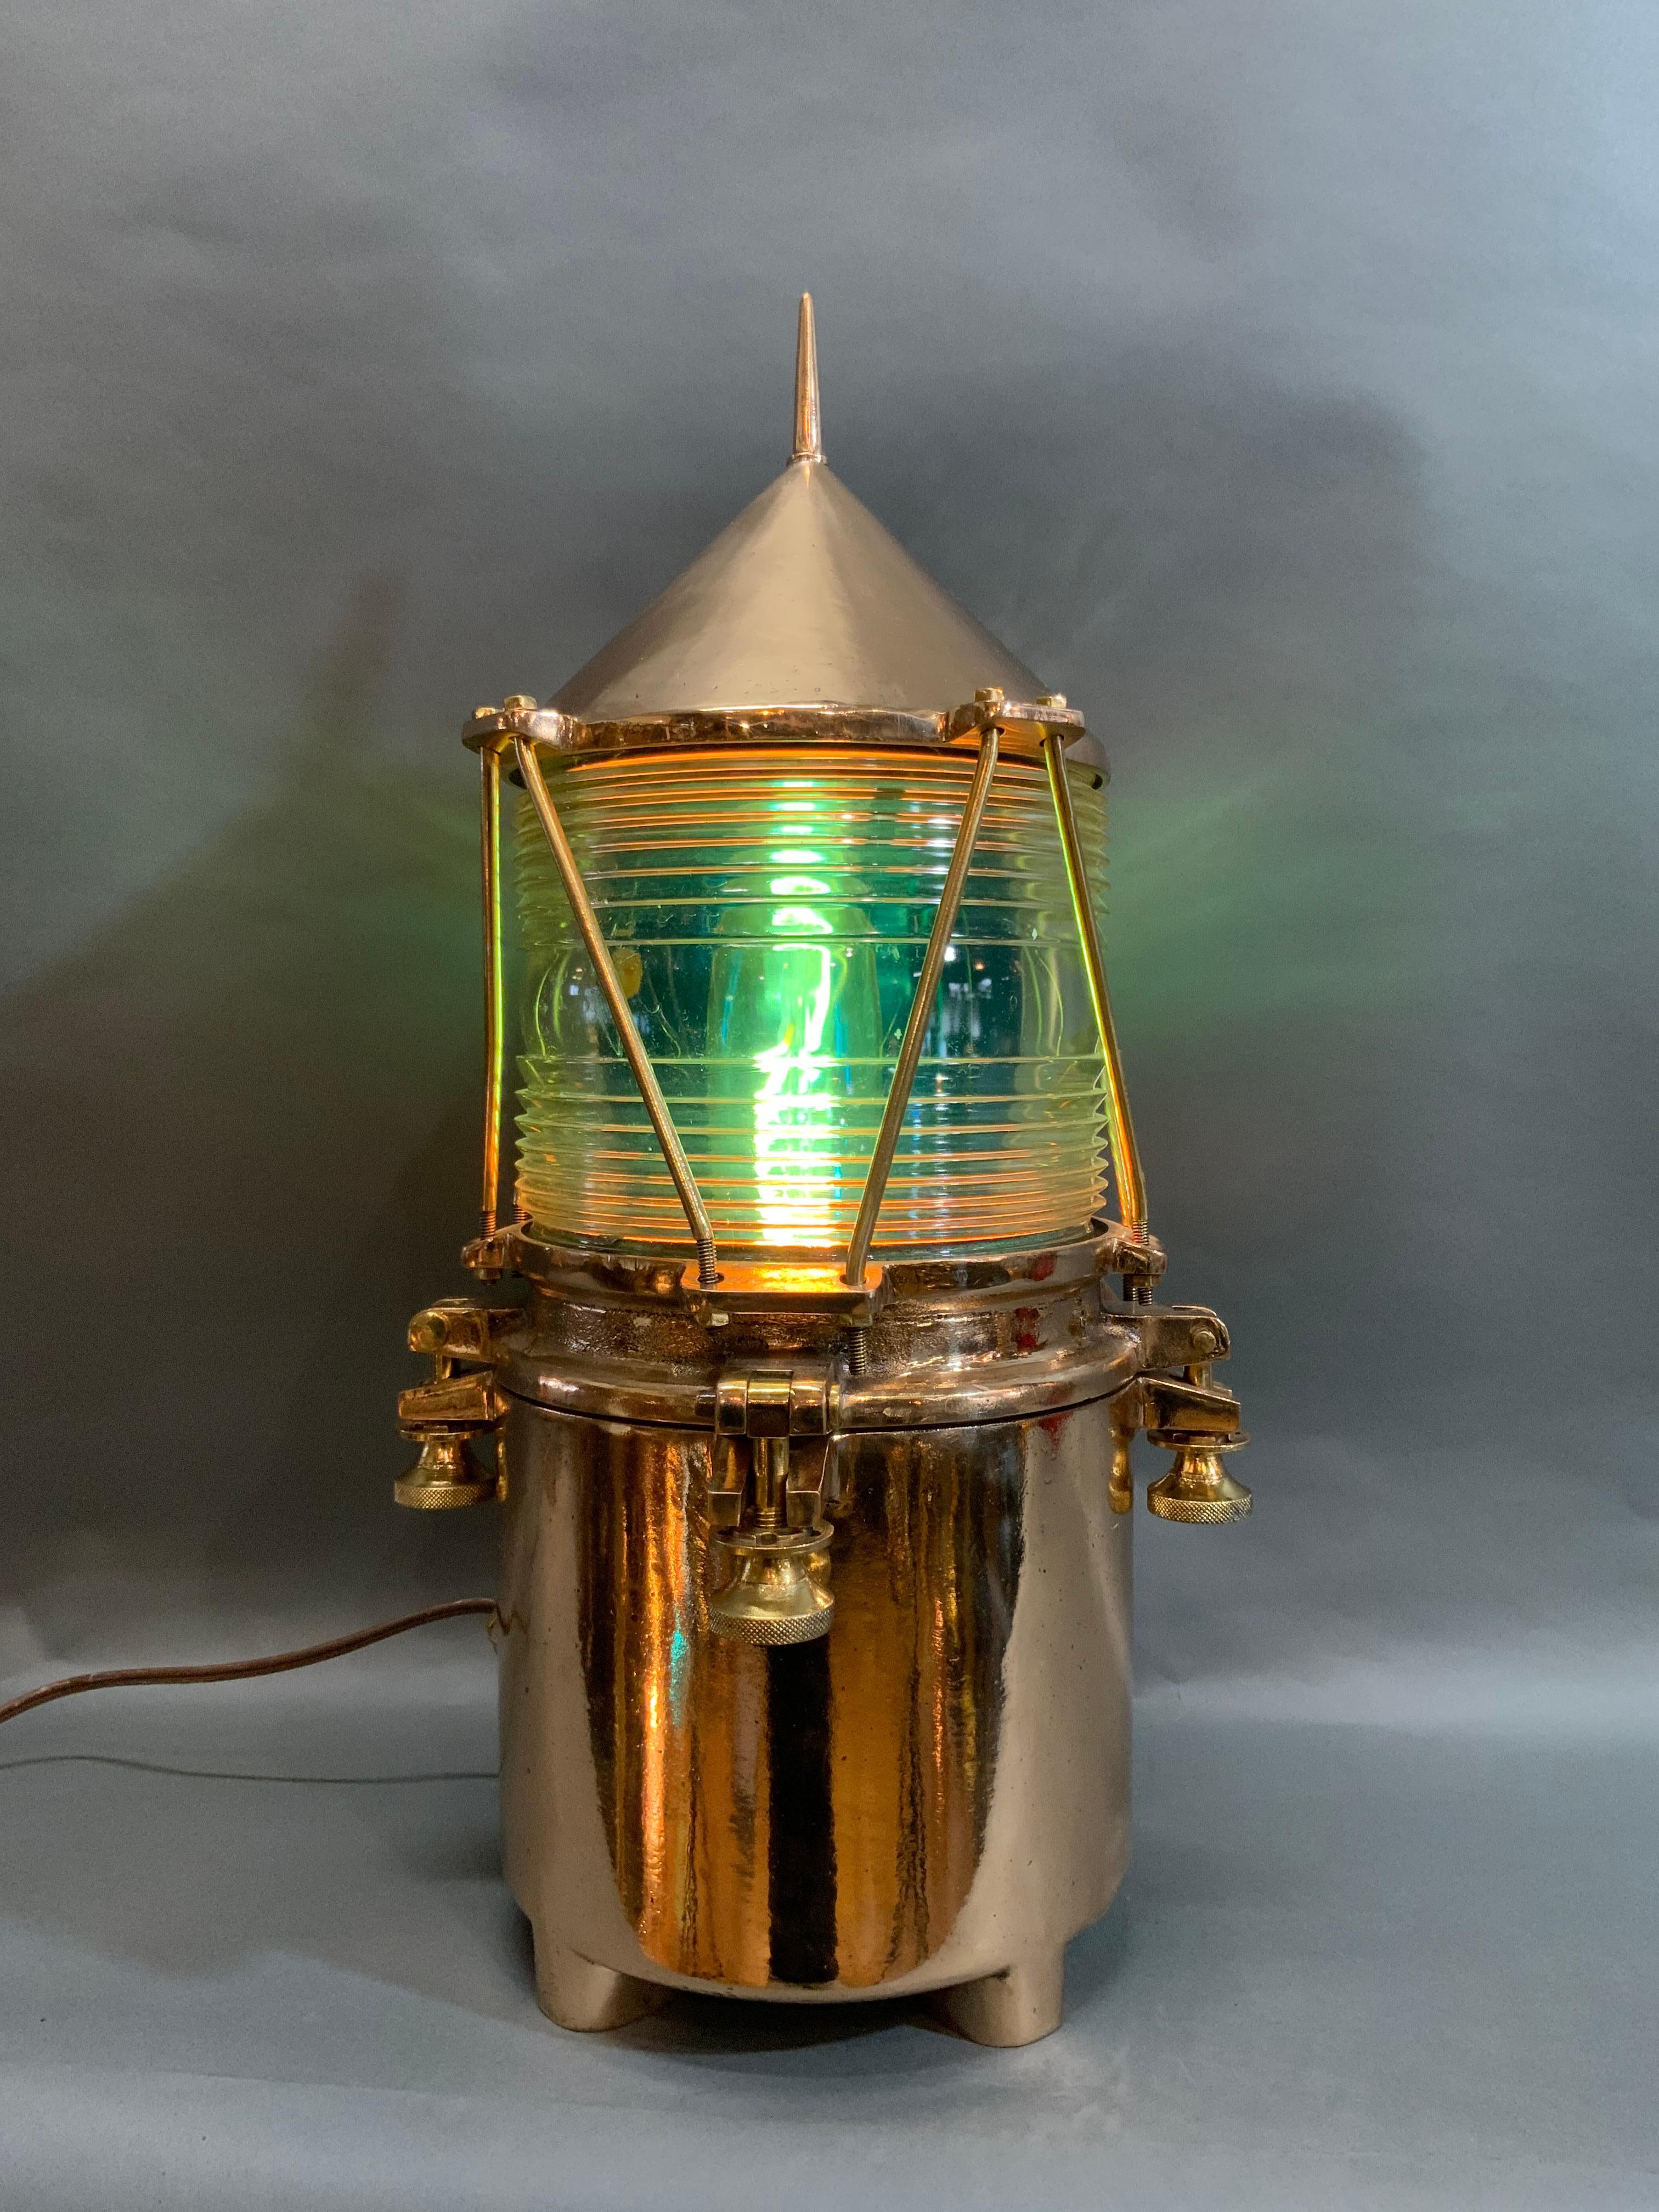 Maritime beacon of solid brass with thick glass Fresnel lens. Meticulously polished and lacquered. Rare design with spiked top, protective bars, and flanged feet. Wired with electricity for home use.

Overall dimensions: 24